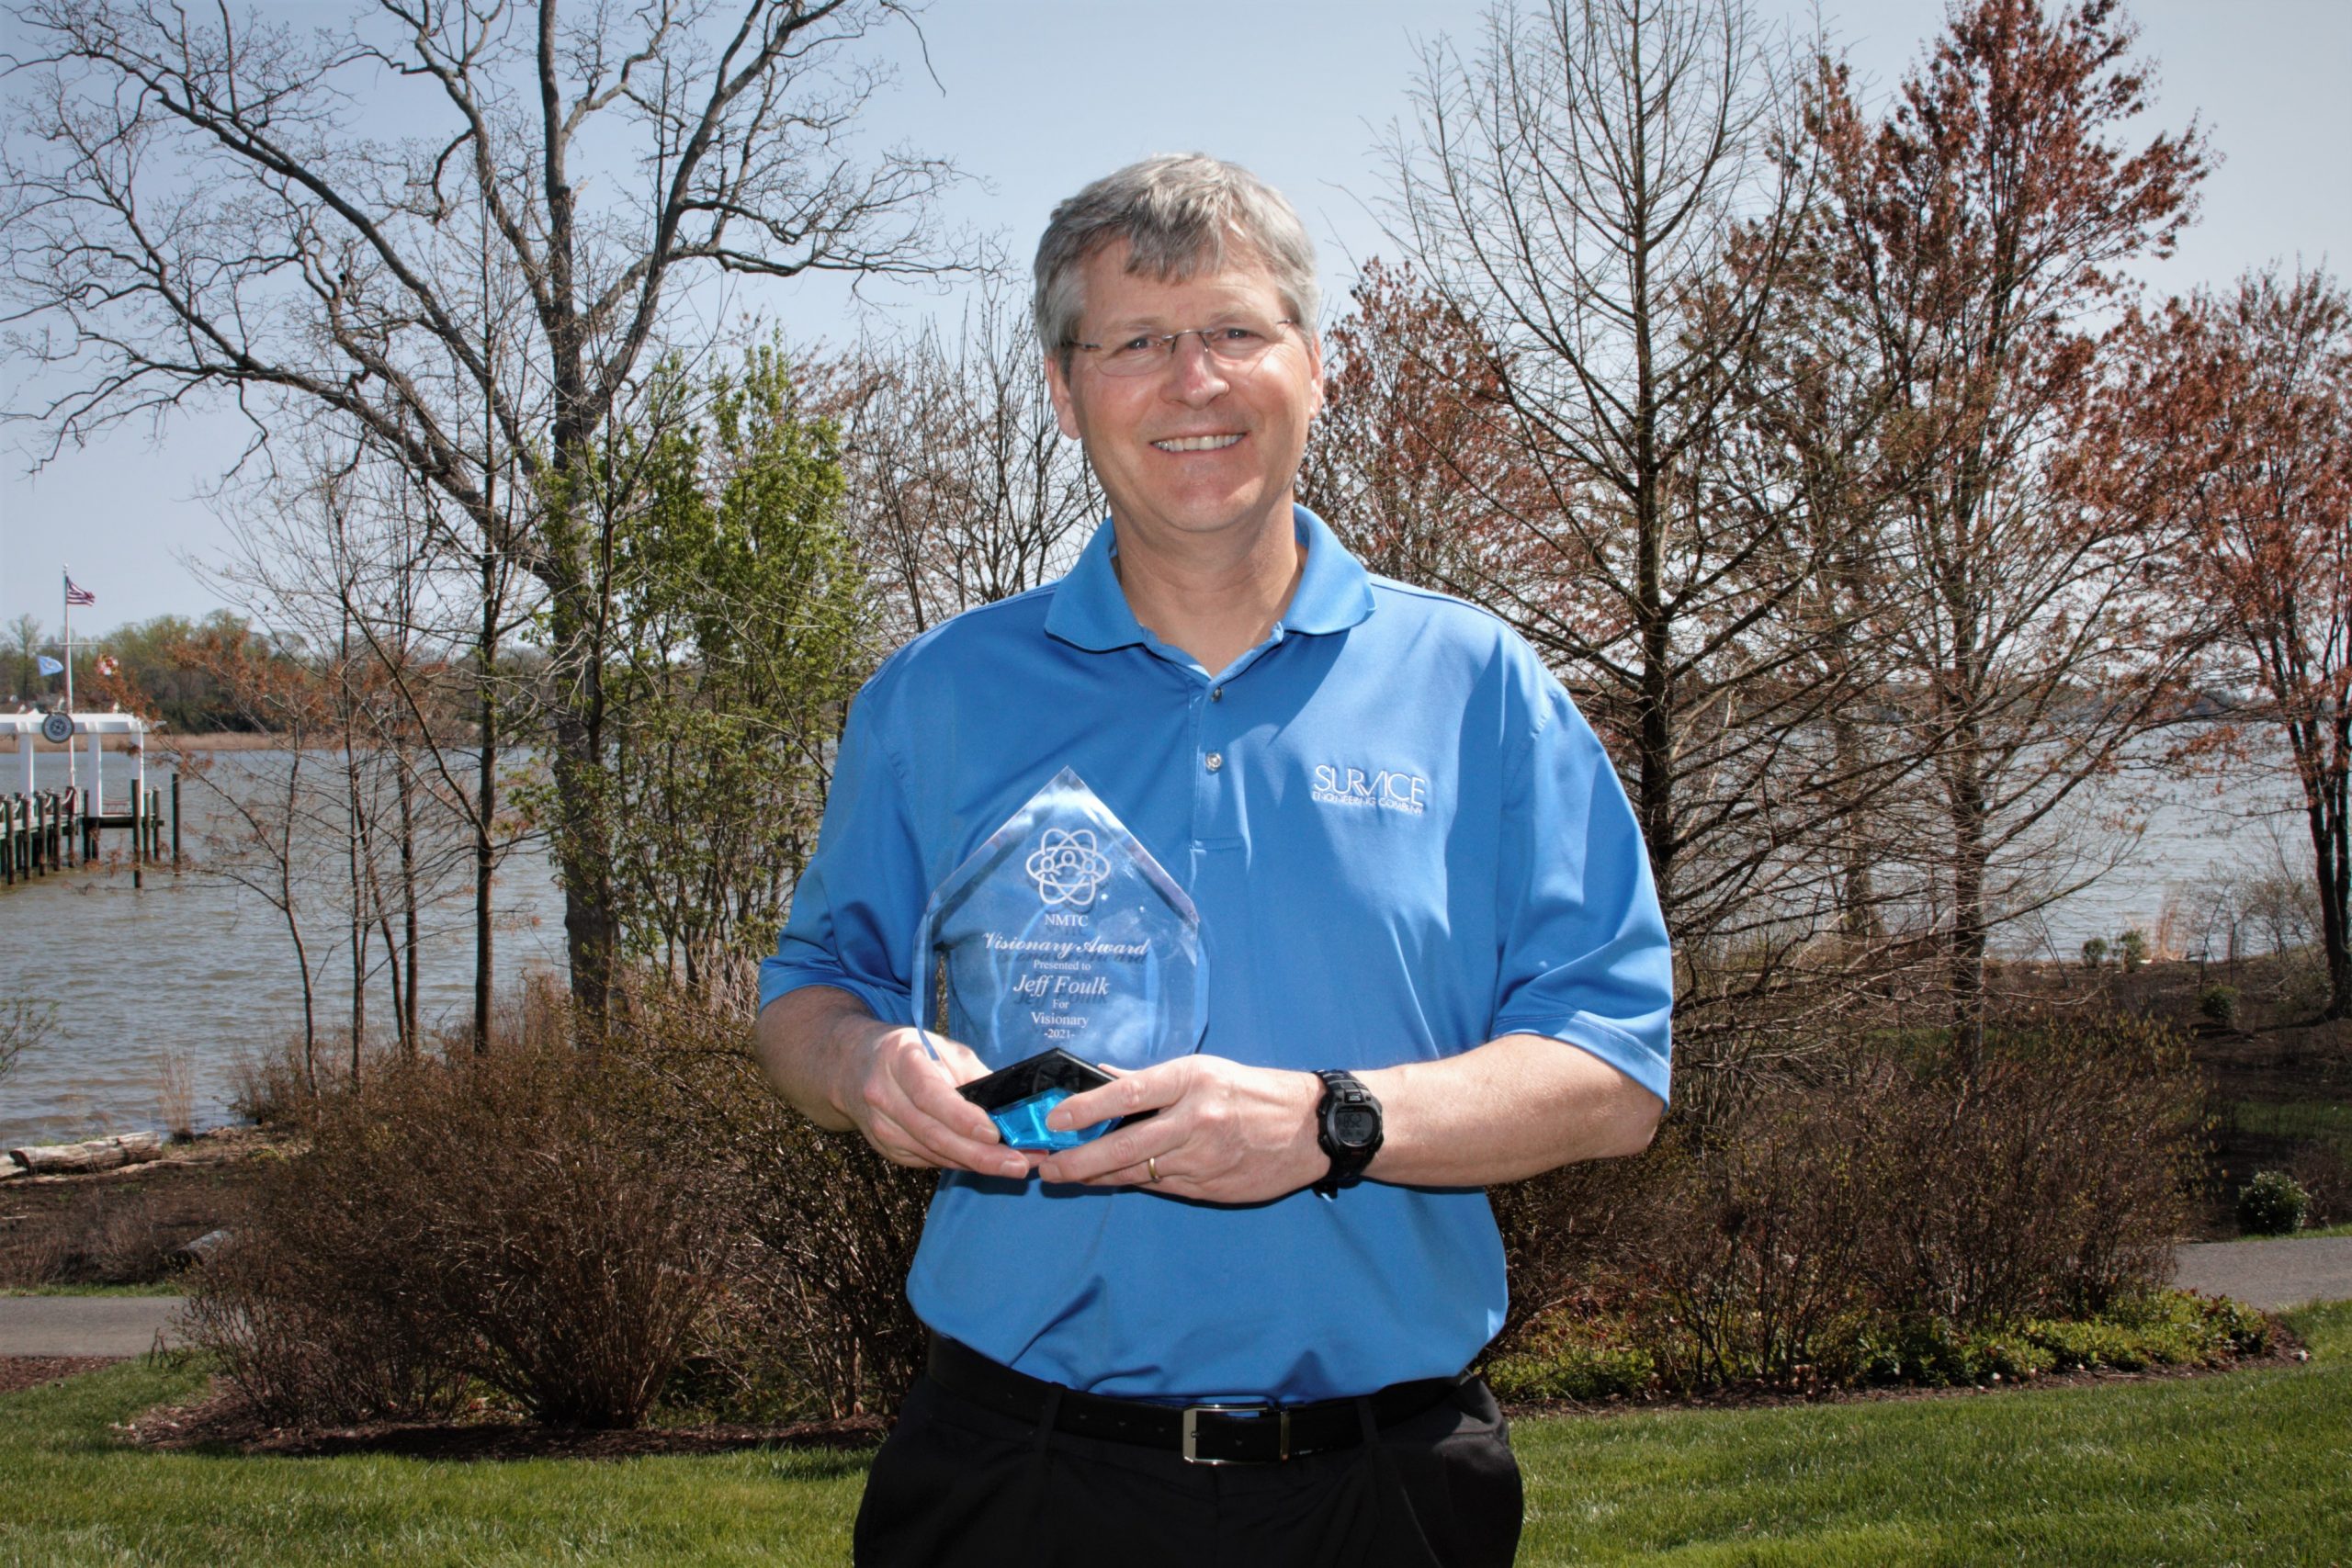 SURVICE CEO, Jeff Foulk with his NMTC Visionary Award.